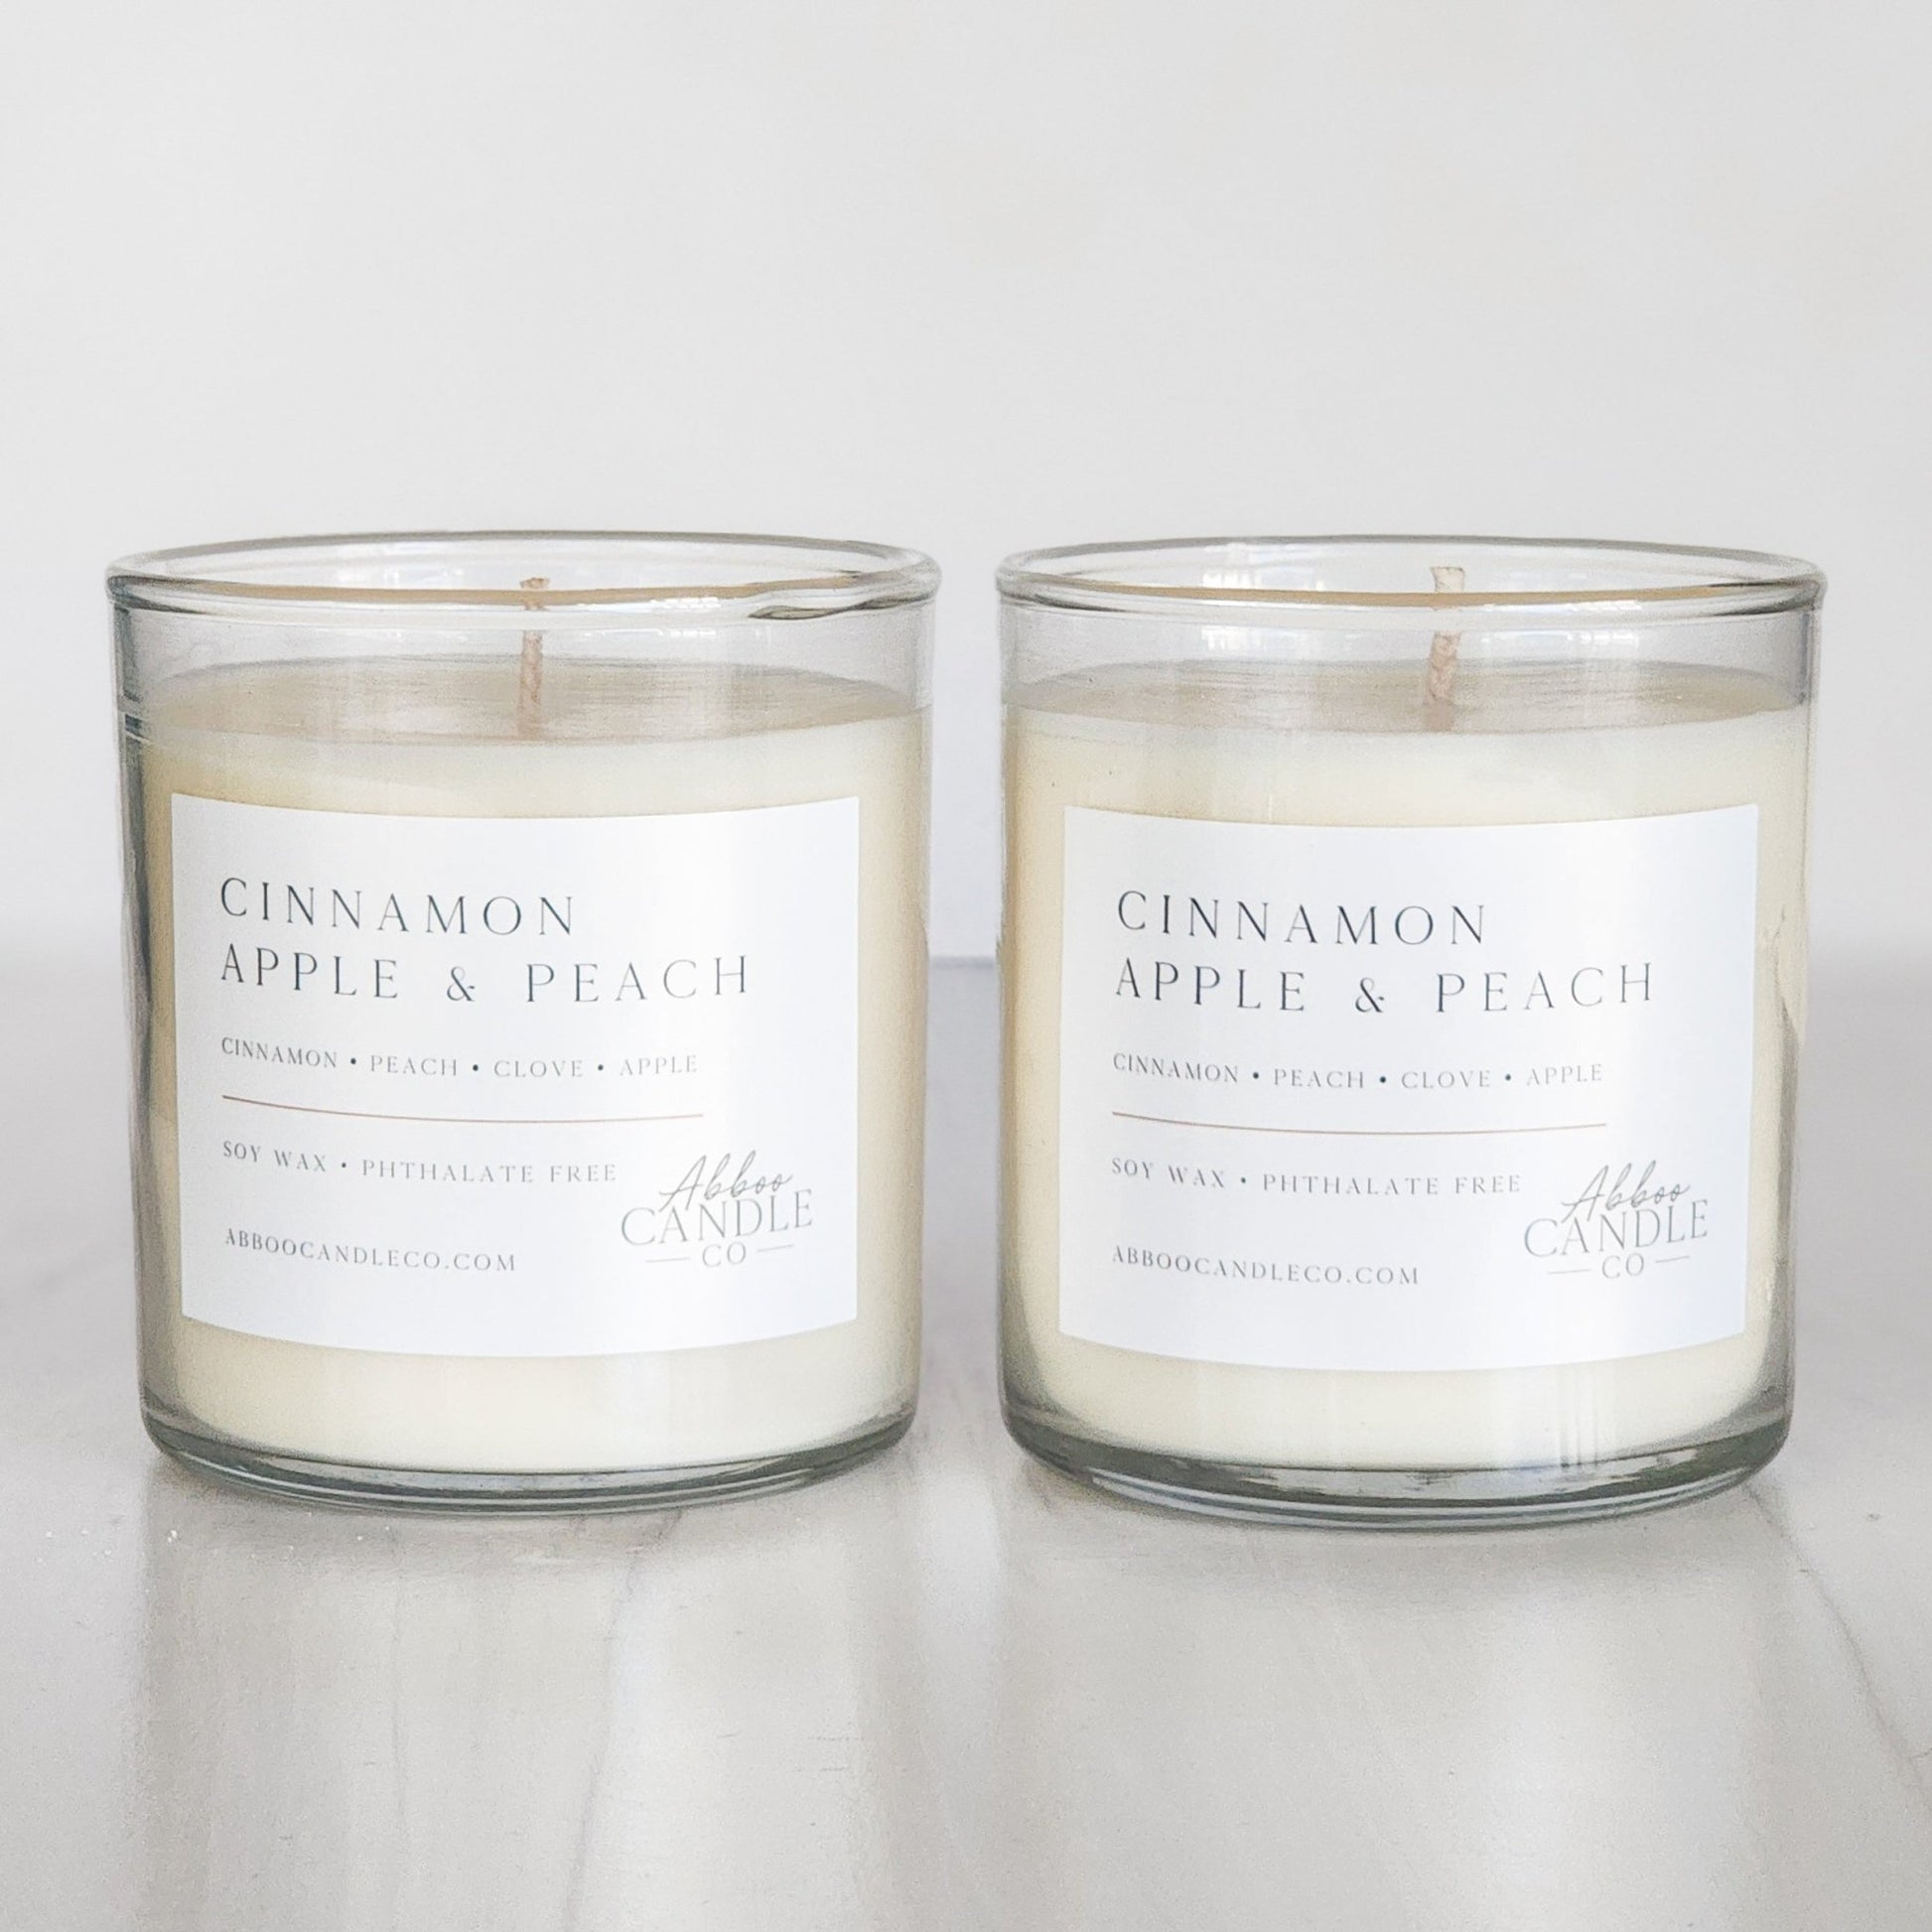 Cinnamon Apple and Peach Soy Candle Bundle - Abboo Candle Co